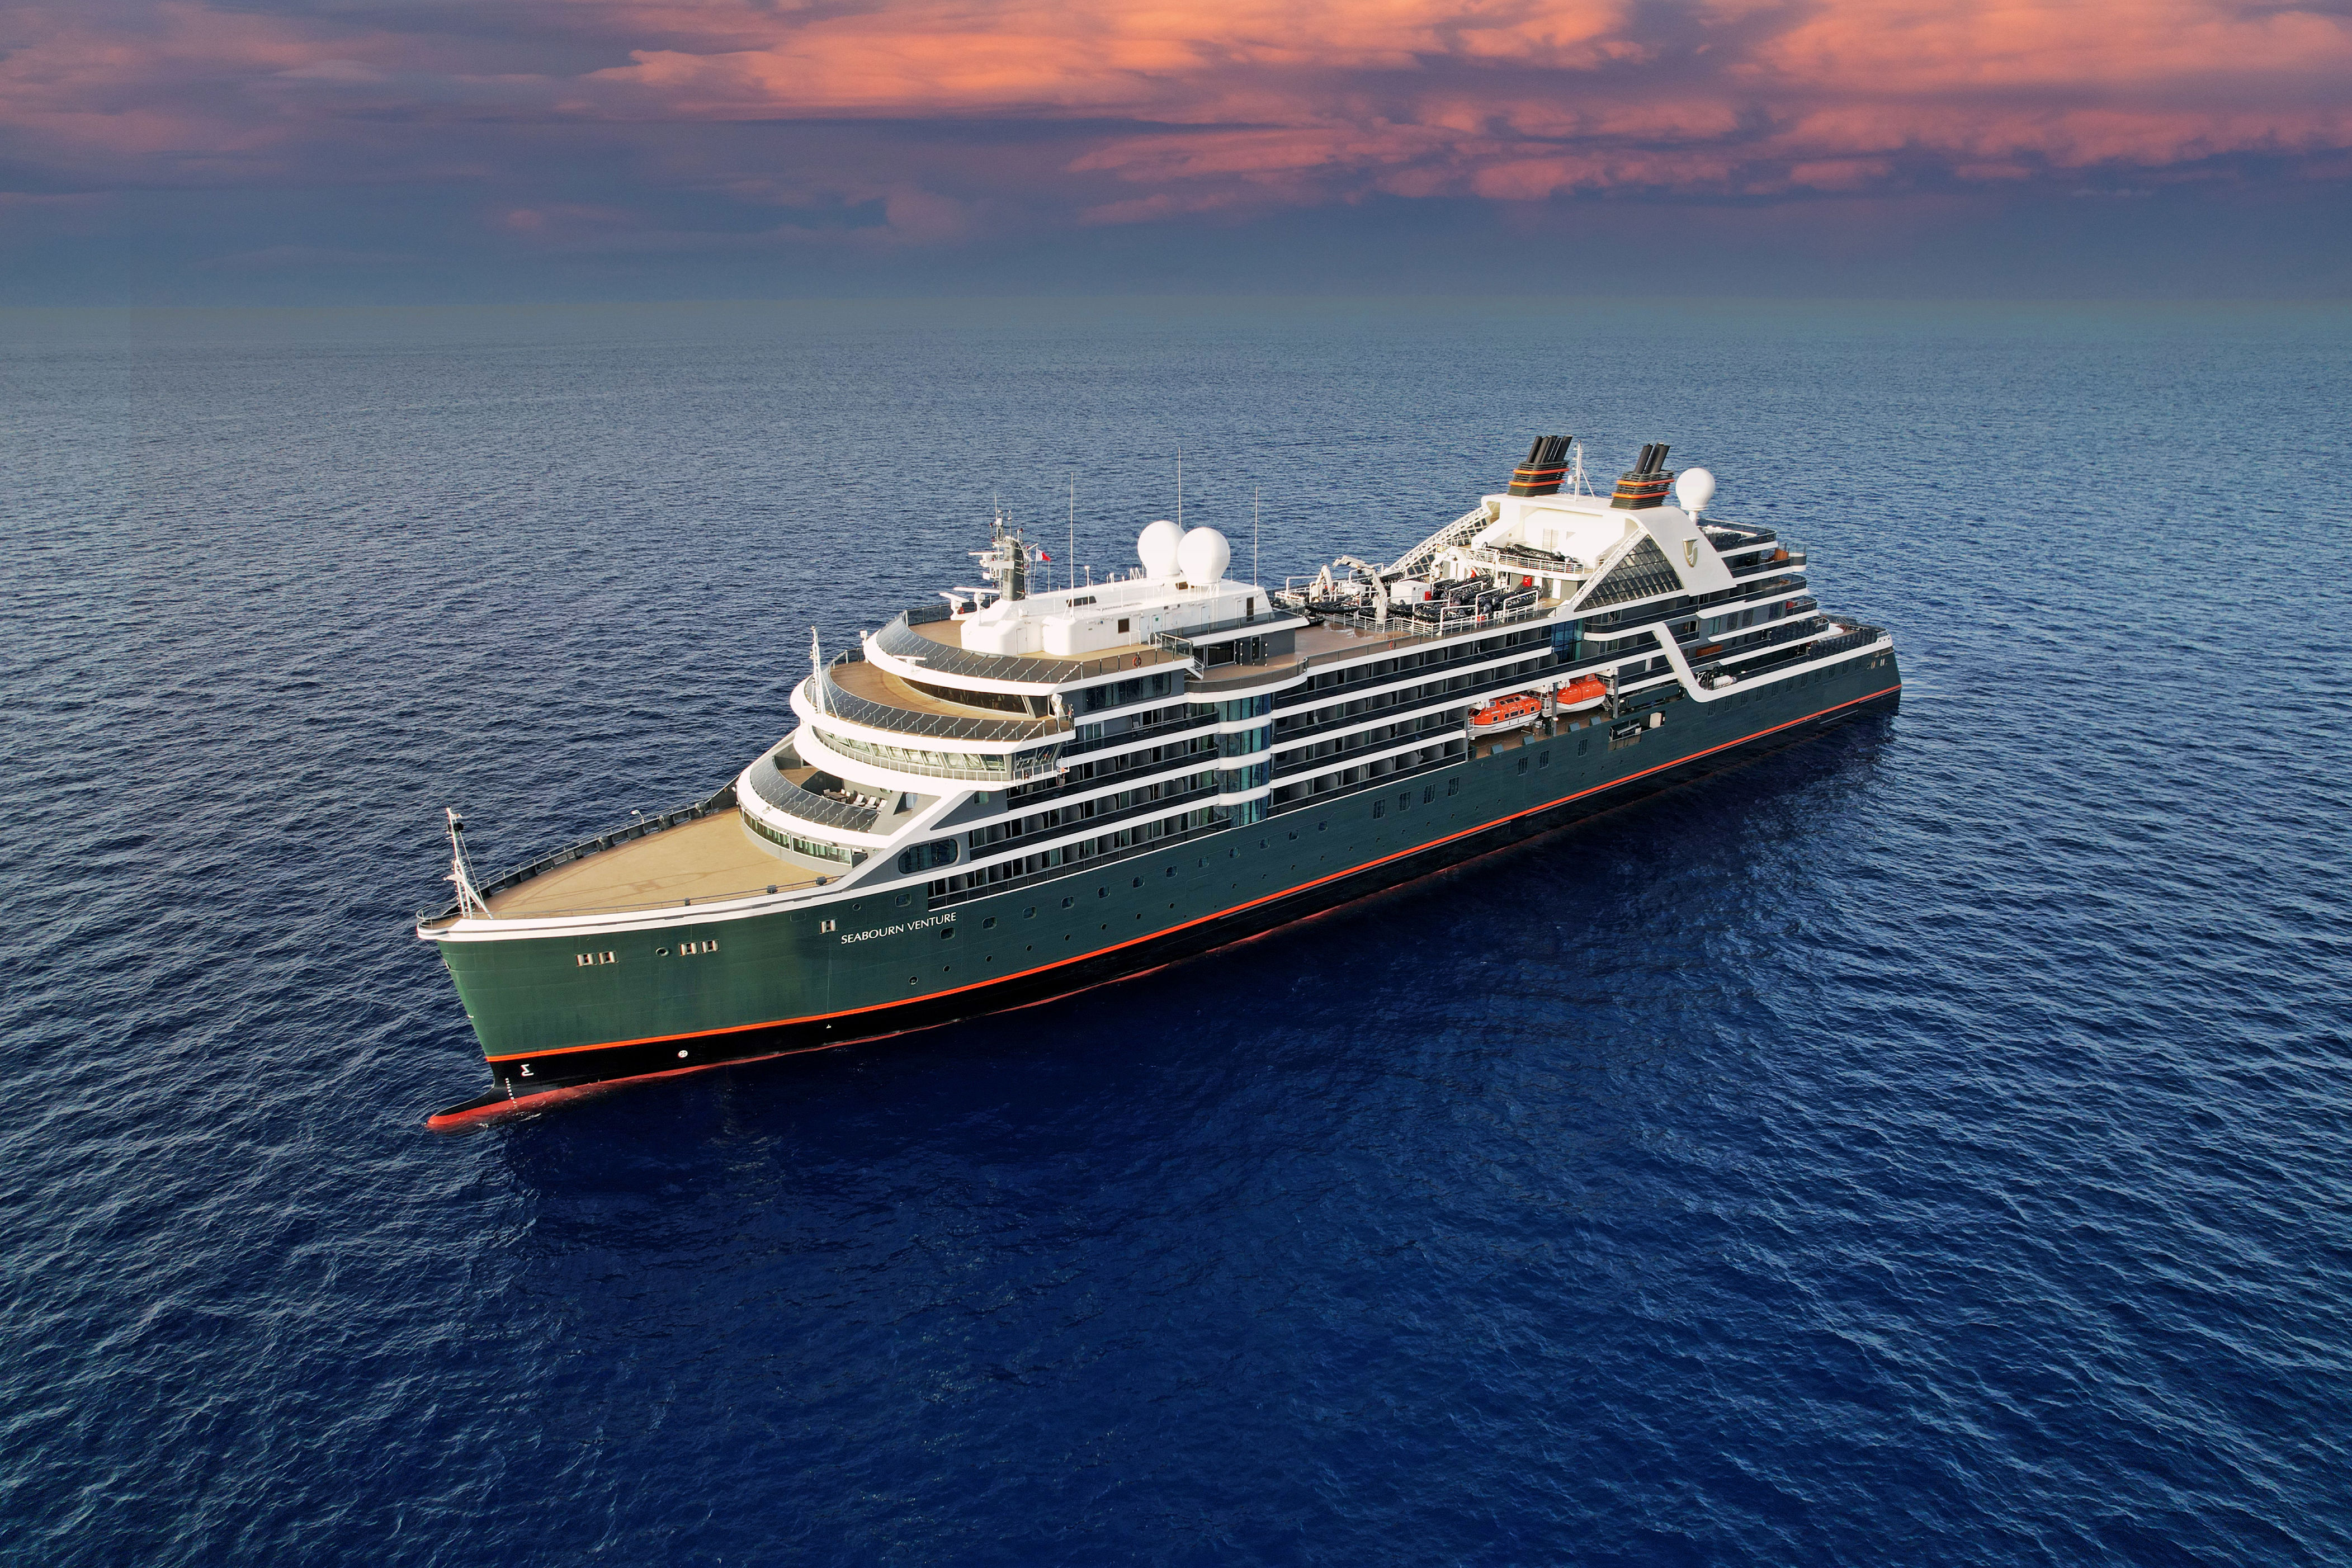 <p>The world's best cruise lines for adults have one major perk in common: the child-free utopia passengers are afforded while sailing. <a href="https://www.cntraveler.com/story/crowded-cruise-ship-tips?mbid=synd_msn_rss&utm_source=msn&utm_medium=syndication">Daydreaming on deck</a>, leisurely romantic dinners, dancing into the wee hours, popping champagne, and even getting tatted—such unabashed joys have <em>everything</em> to do with being grownup and <em>nothing</em> to do with kids.</p> <p>The best adult cruises allow passengers to pursue relaxation, rejuvenation, and indulgence, undisturbed by tantrum-minded toddlers and other children <a href="https://www.cntraveler.com/story/cruise-etiqutte-loud-drunk-cruise-ship-passengers?mbid=synd_msn_rss&utm_source=msn&utm_medium=syndication">potentially ruining</a> your me-time groove. For when it's time to sail away from the stresses of life on land, we've pulled together the very <a href="https://www.cntraveler.com/gallery/best-cruise-ships-gold-list?mbid=synd_msn_rss&utm_source=msn&utm_medium=syndication">best cruise lines</a> for adults, plus their most exciting itineraries available for booking in 2024 and early 2025.</p> <p>Note that while some of these lines are strictly adults-only, others are adults-oriented, meaning that they may have some well-behaved older children on board during school holidays but otherwise, rarely do. Most are small ship experiences with geared-to-grownup itineraries spanning the globe and leaning into all-inclusiveness and luxury—all the better to admire when it’s all about you.</p> <p><em>All listings featured on</em> Condé Nast Traveler <em>are independently selected by our editors. If you purchase something through our links, we may earn an affiliate commission.</em></p><p>Sign up to receive the latest news, expert tips, and inspiration on all things travel</p><a href="https://www.cntraveler.com/newsletter/the-daily?sourceCode=msnsend">Inspire Me</a>